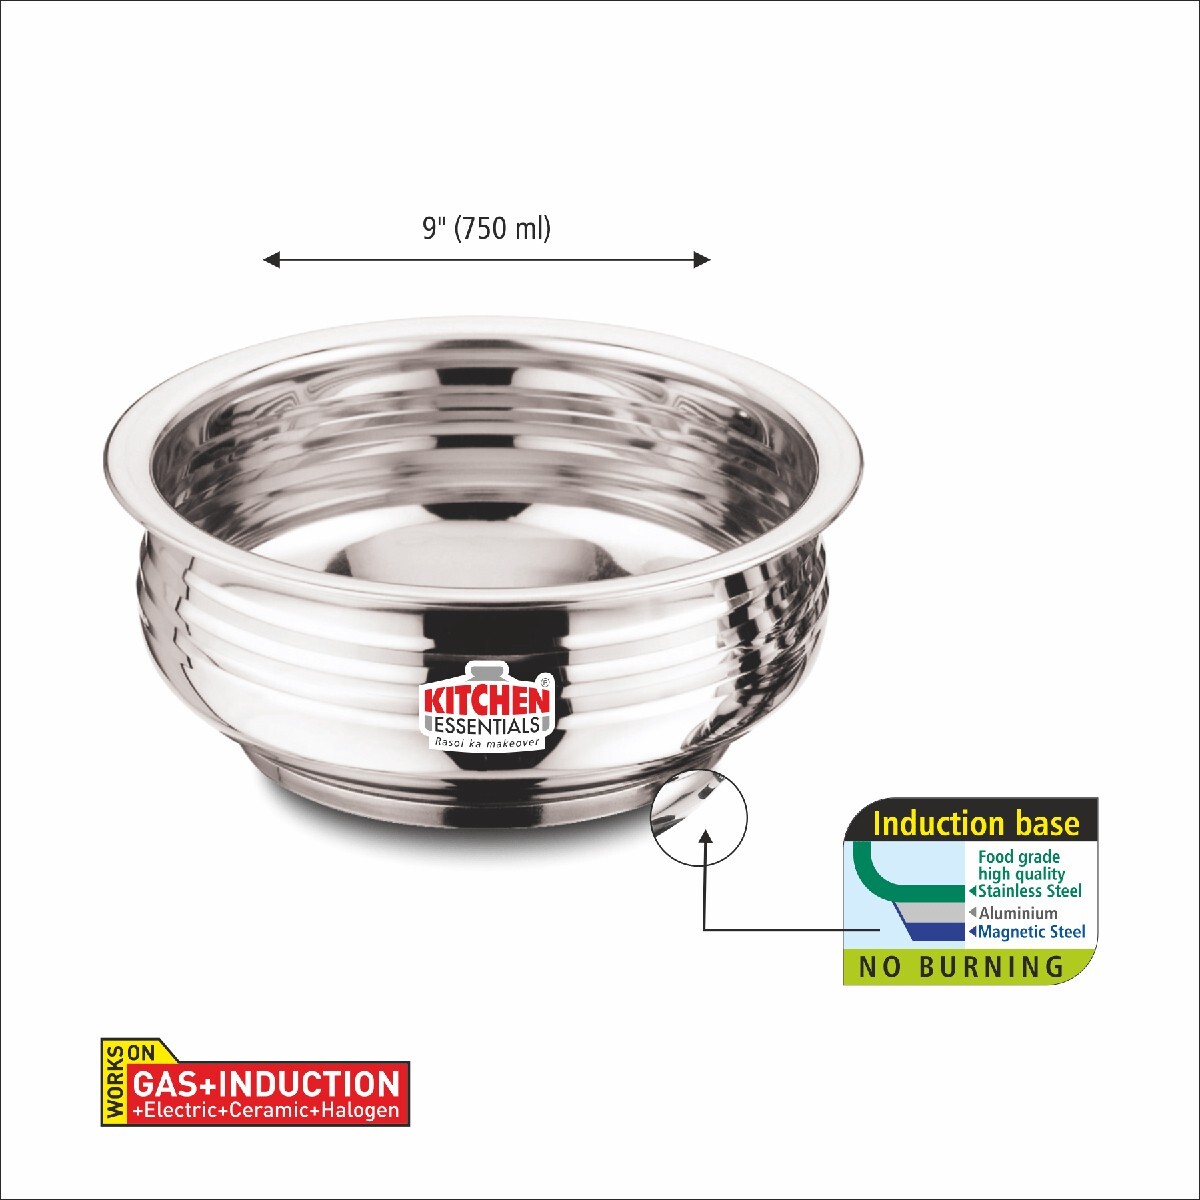 Kitchen Essential Uruly Induction Base Stainless Steel 9